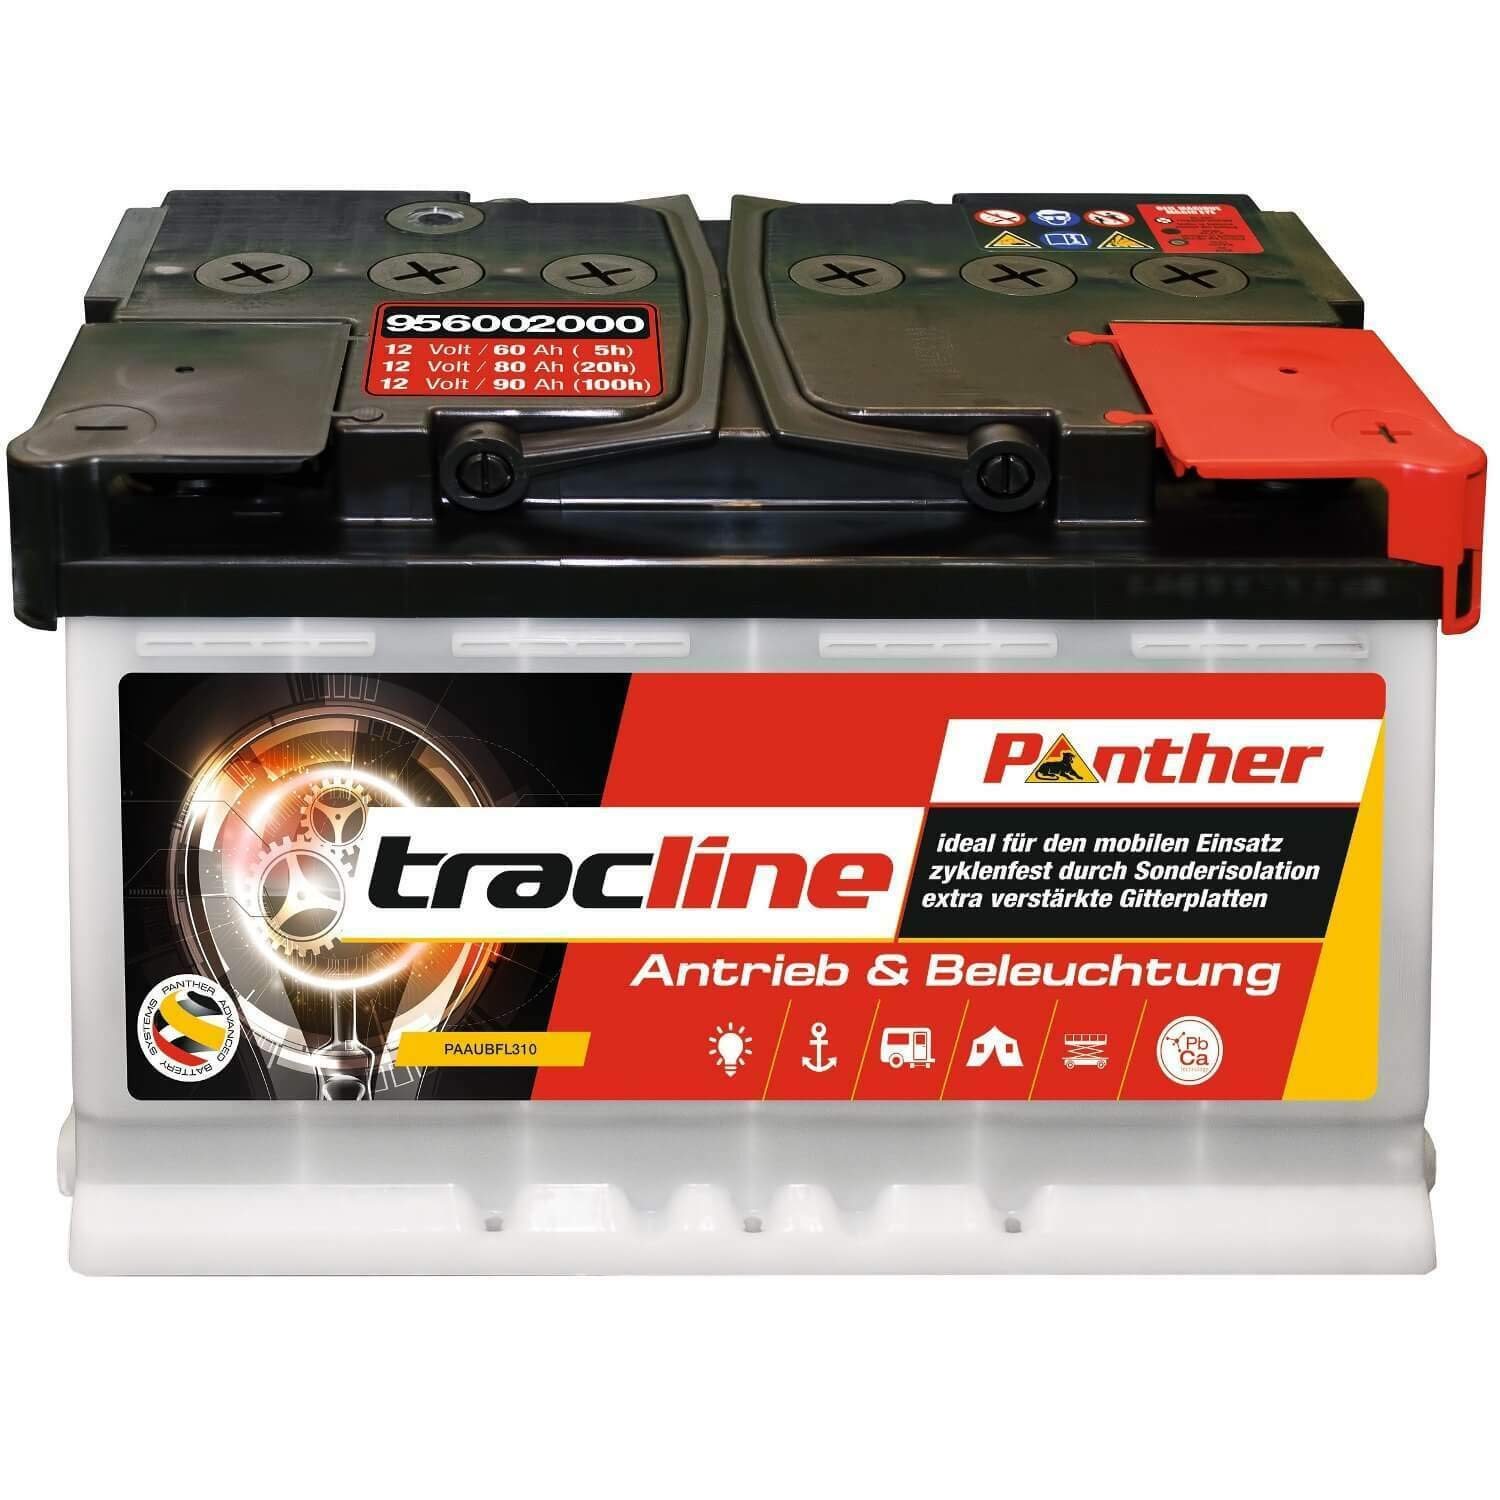 Panther Tracline 12V 90Ah (20h)/75AH (5h) Versorgerbatterie Antrieb & Beleuchtung von Panther